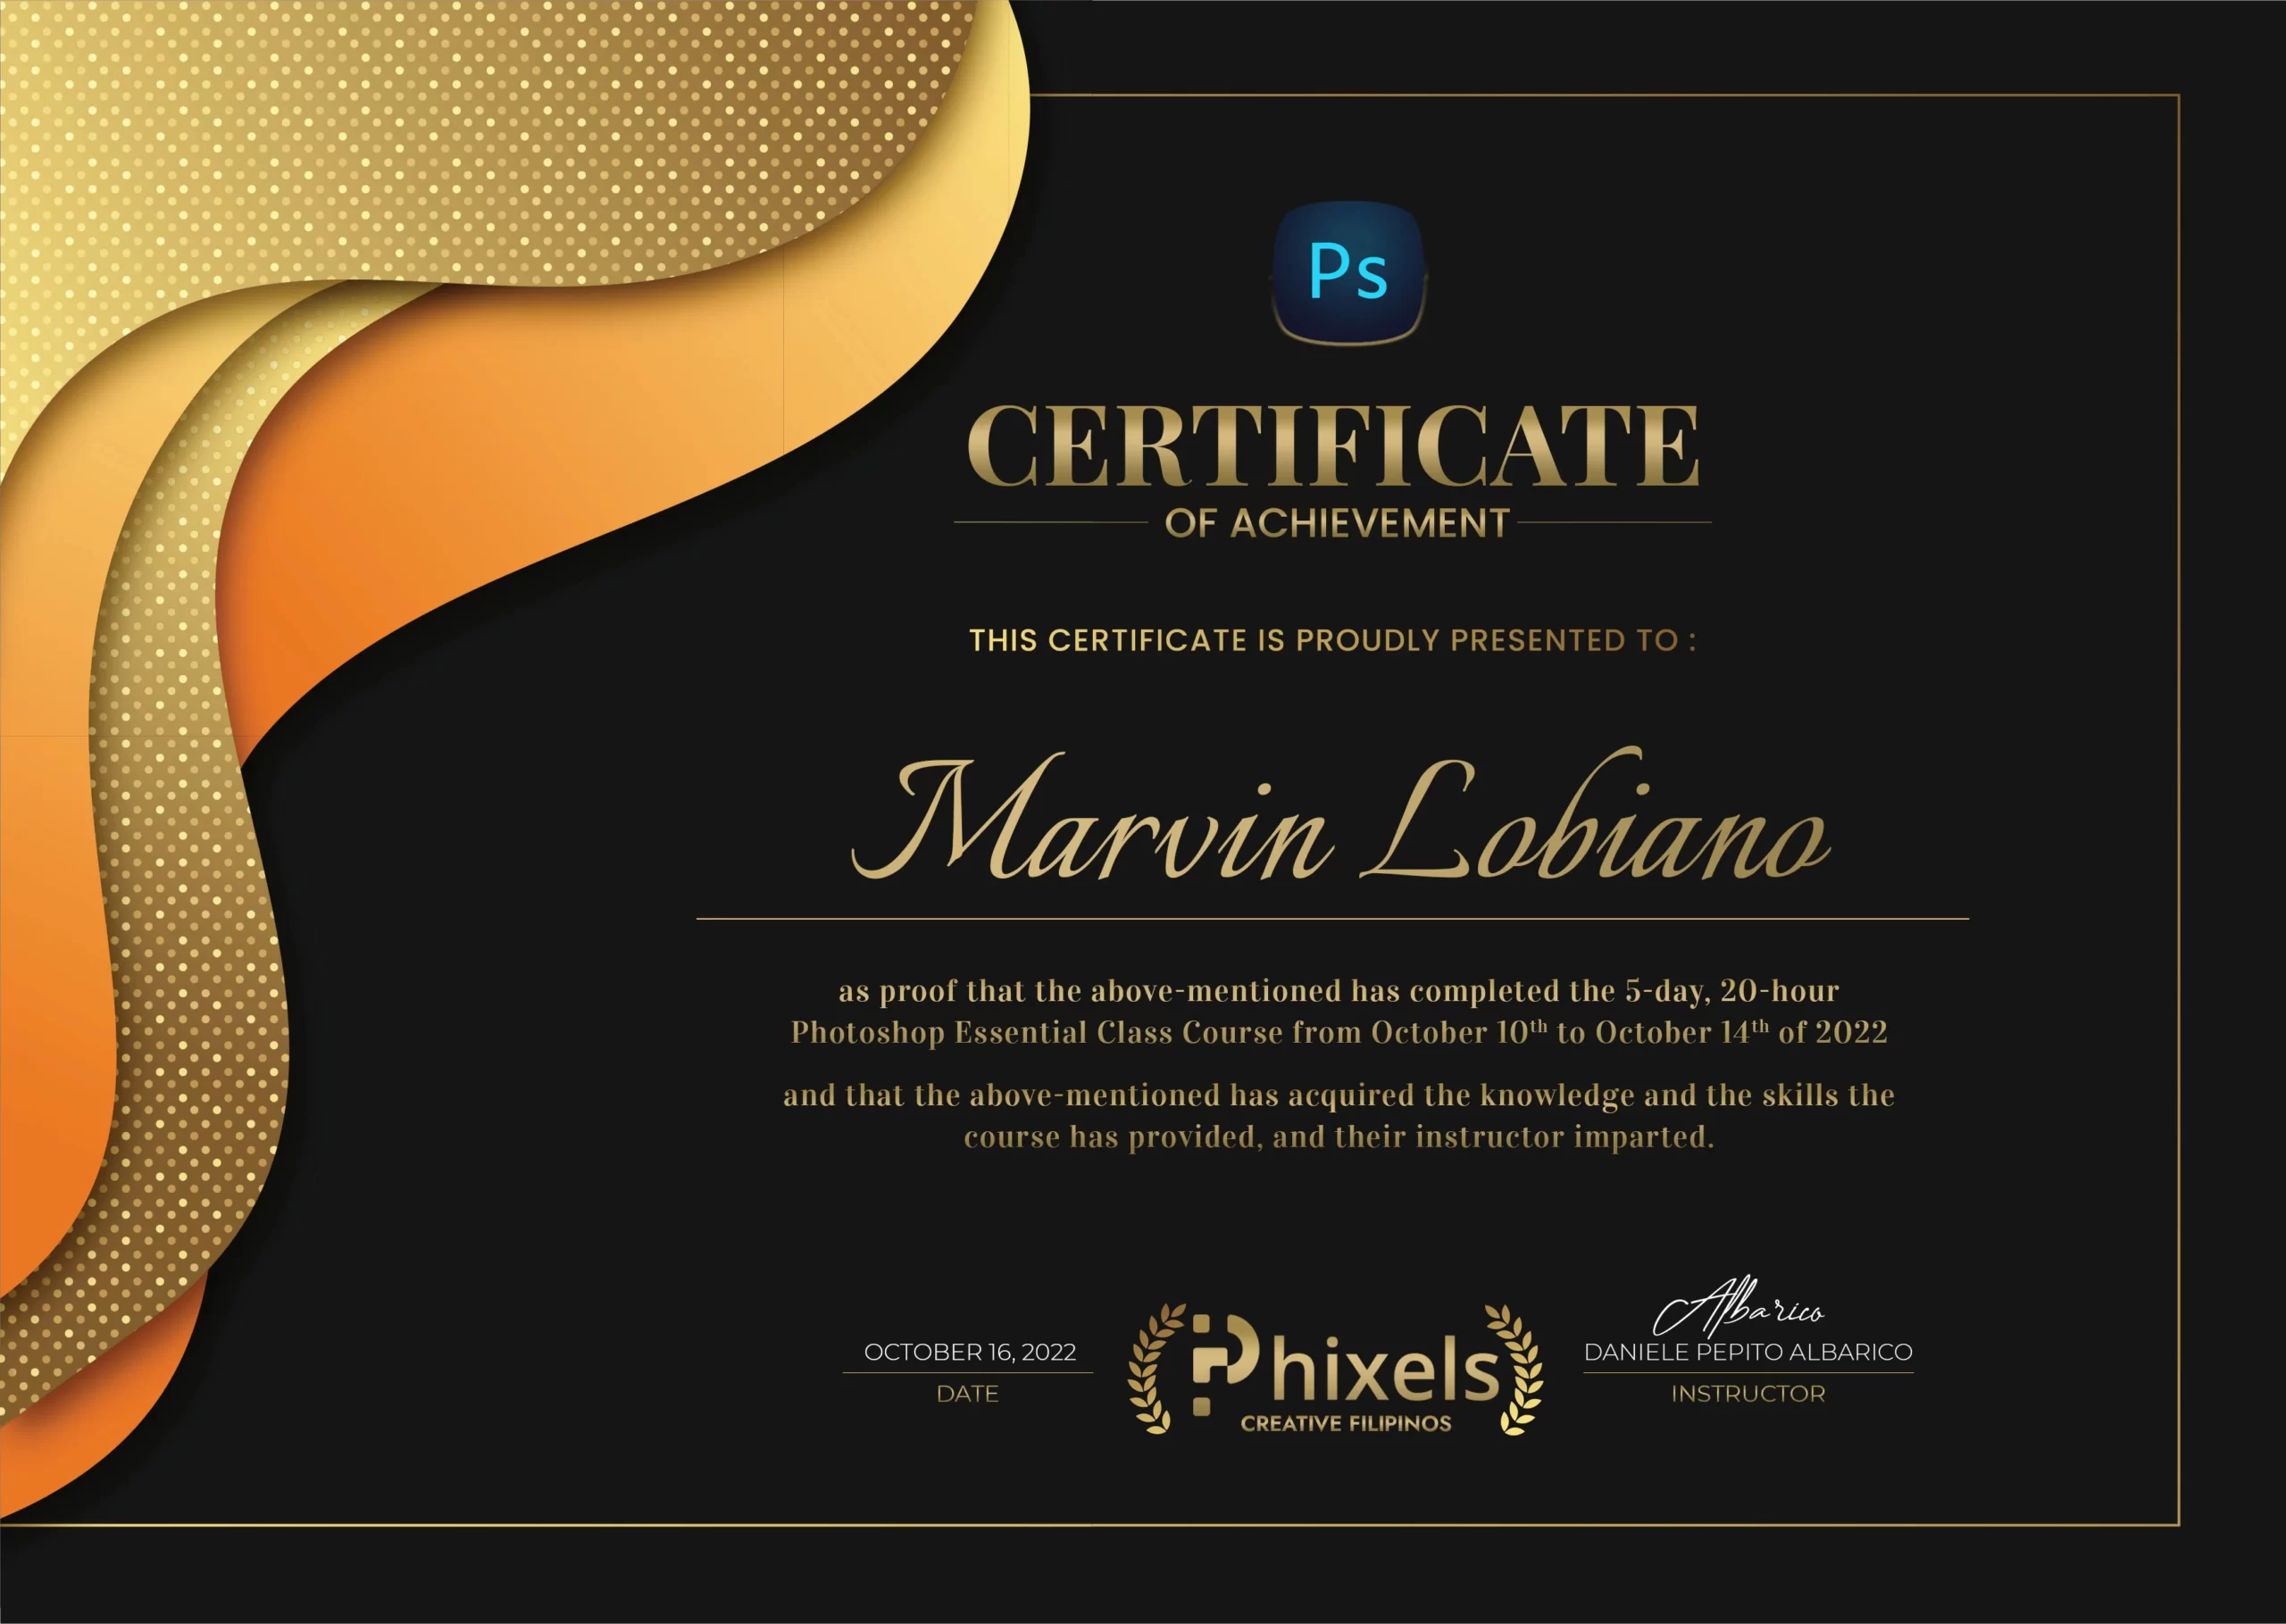 Marvin Lobiano has a Adobe Photoshop Certificate